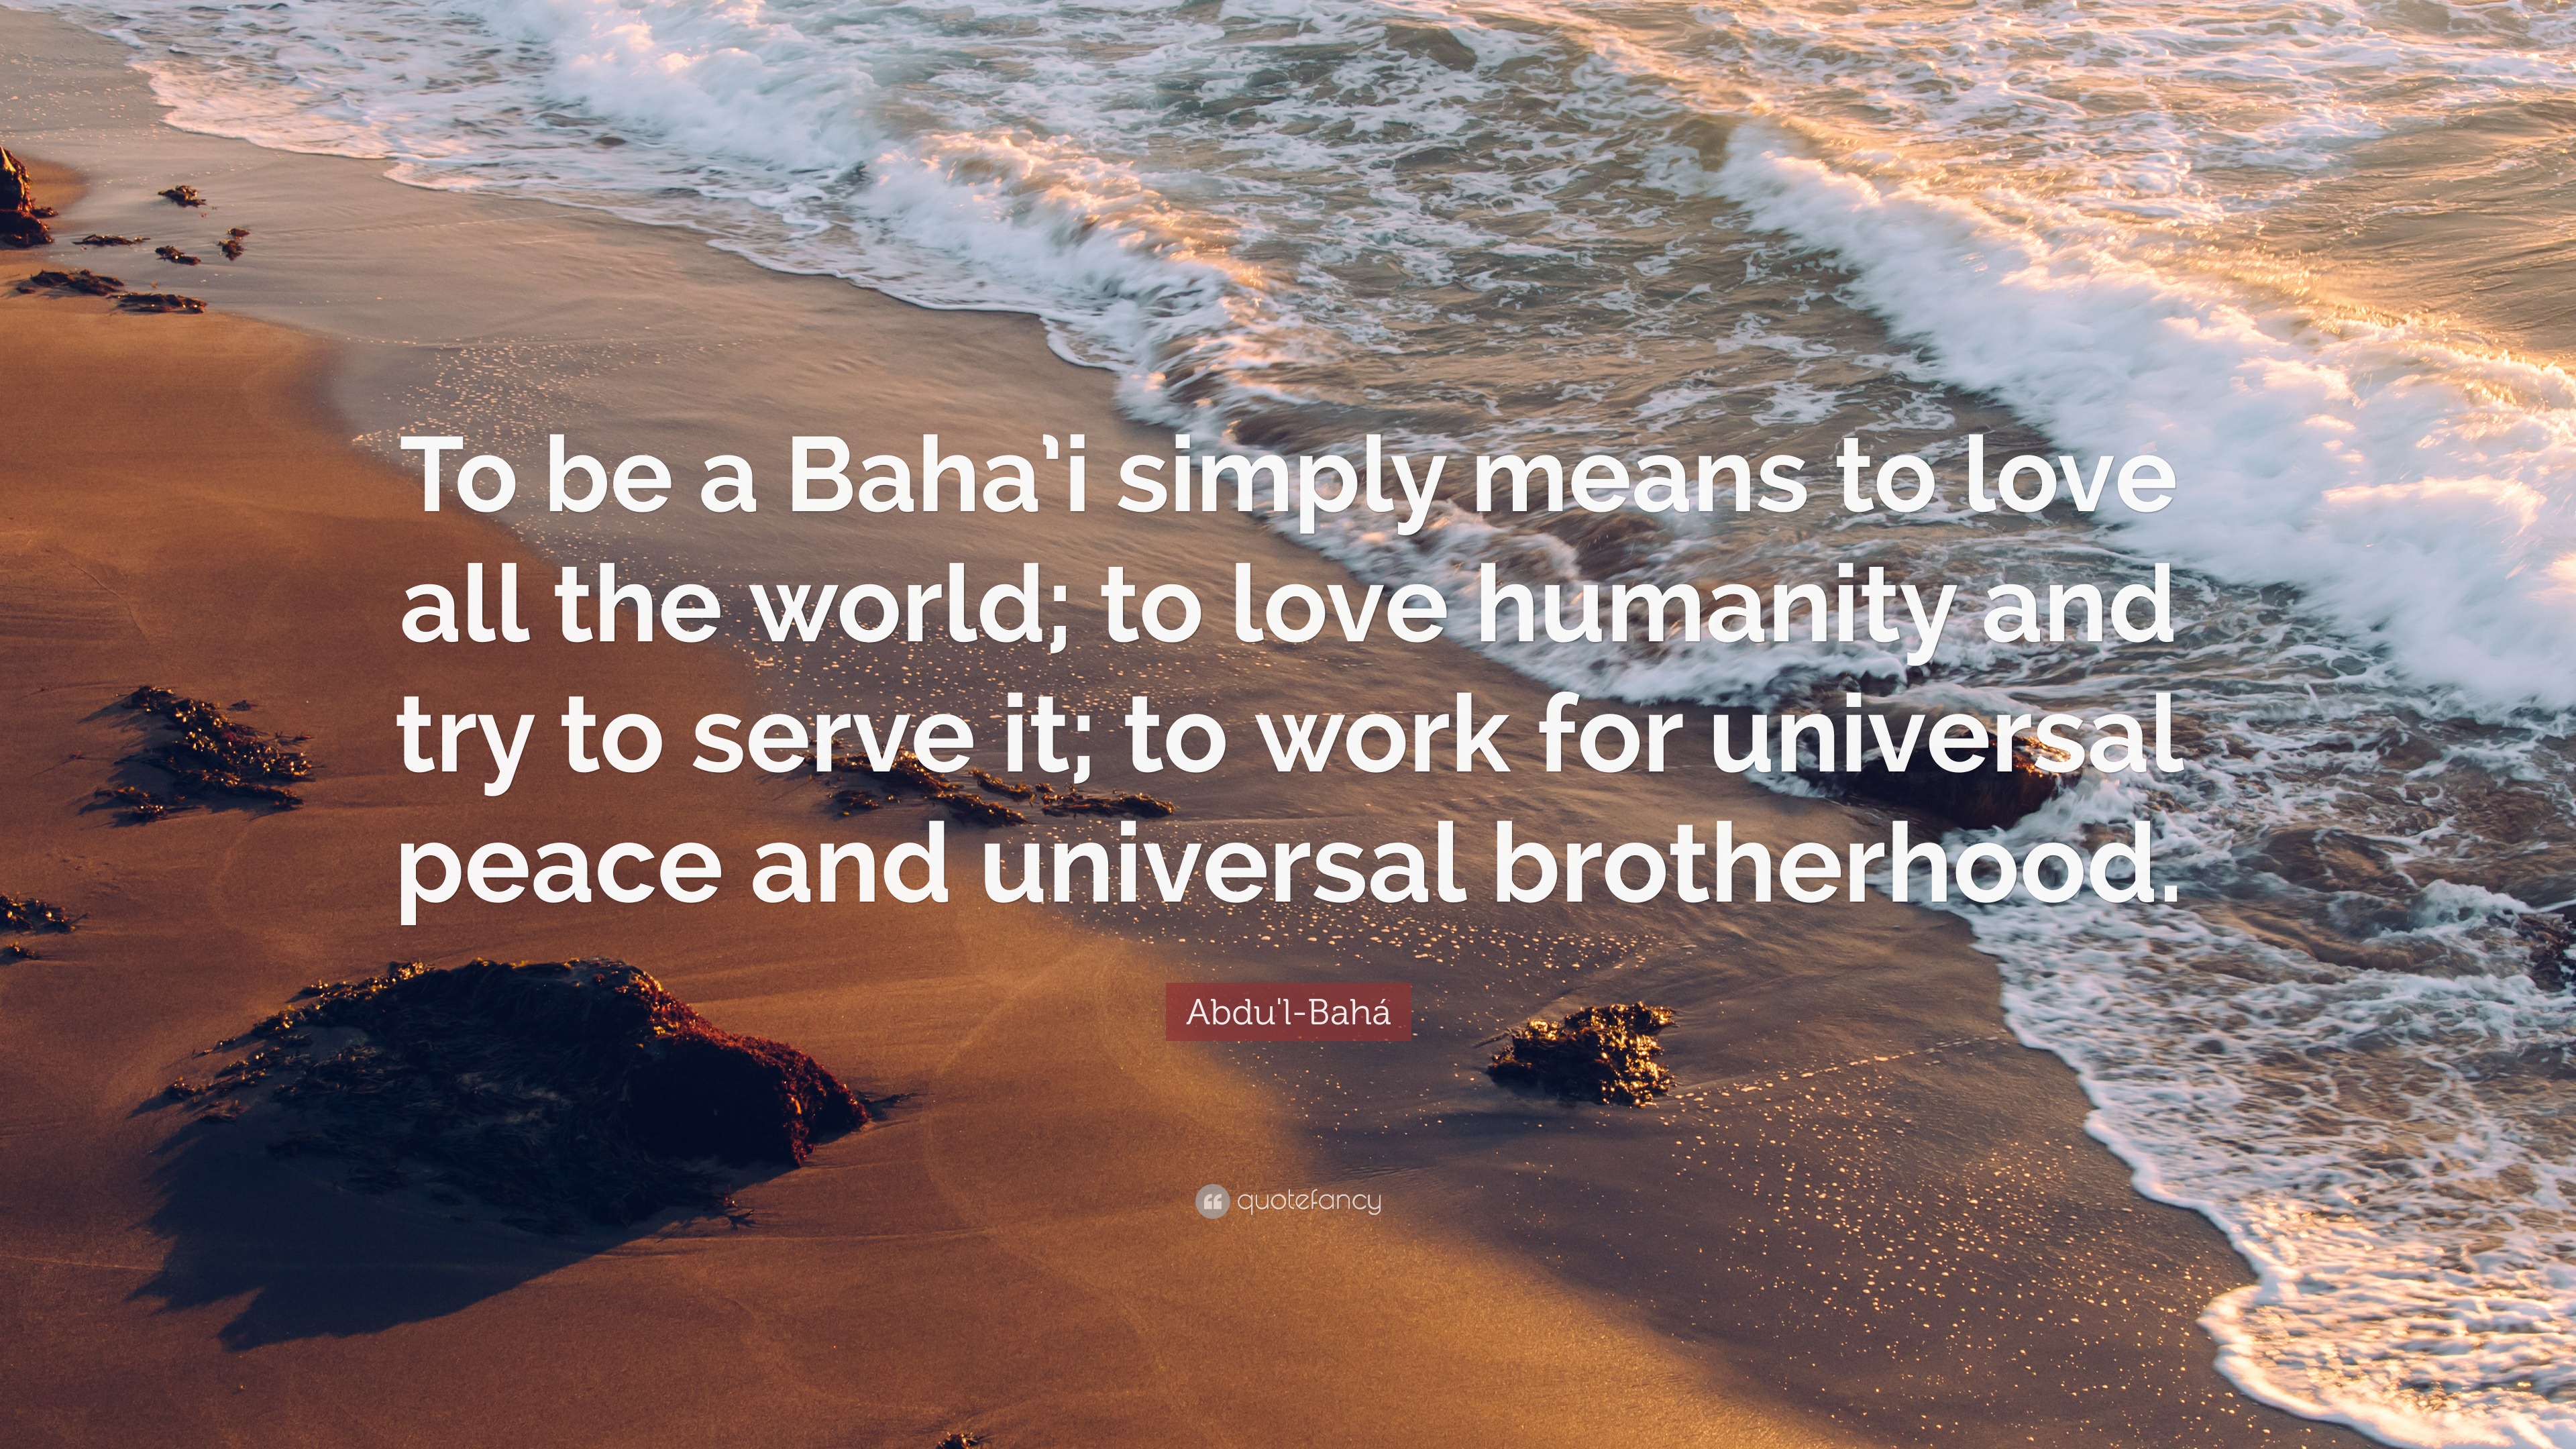 Abdu'lBahá Quote “To be a Baha’i simply means to love all the world